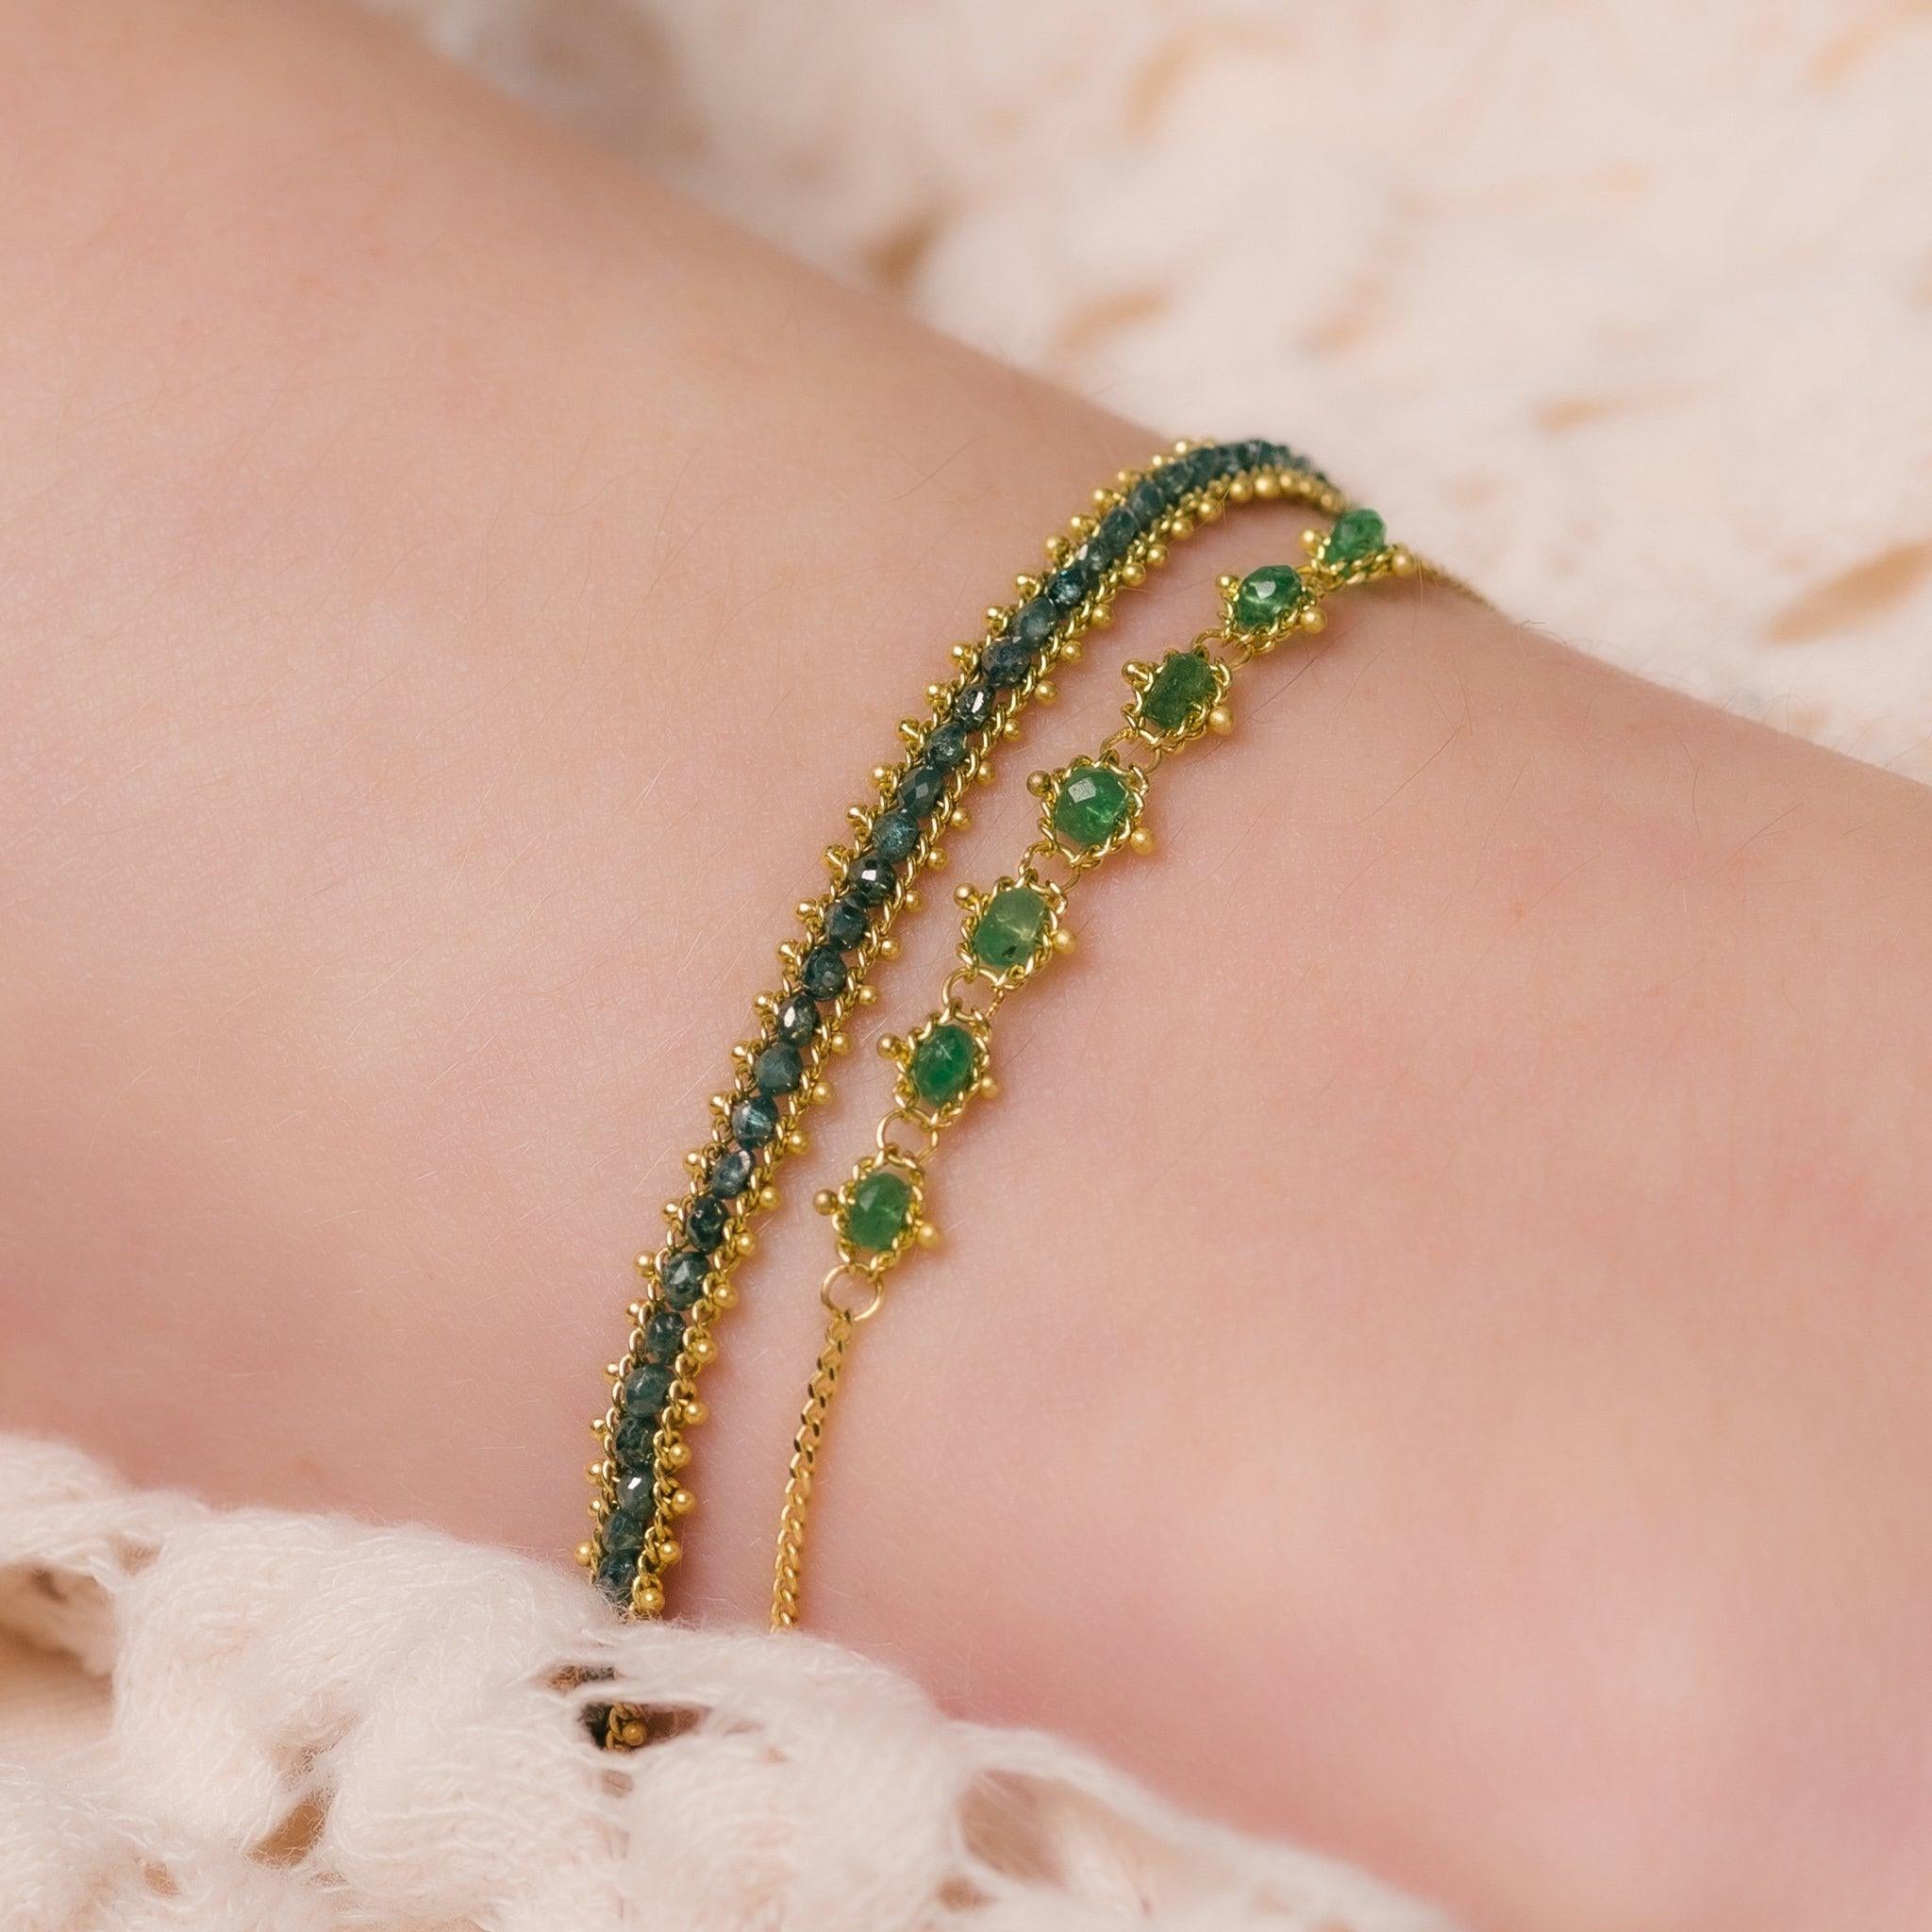 Petite Textile Bracelet in Emerald In New Condition For Sale In Chapel Hill, NC